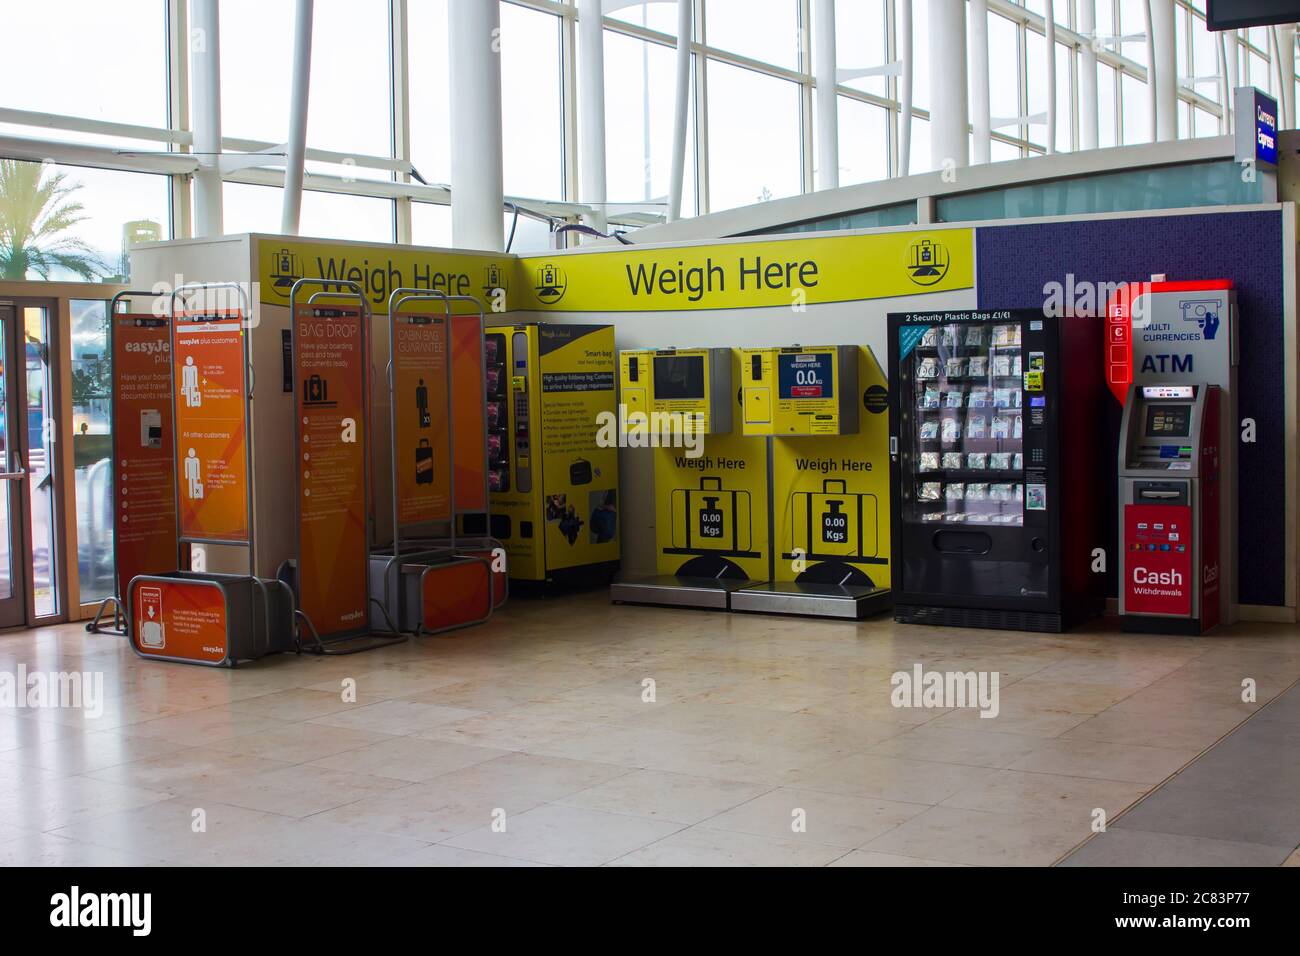 8 July 2020 The empty self weigh in machines in the terminal building at the Liverpool John Lennon Airport, England, during the Corona Virus Crisis Stock Photo